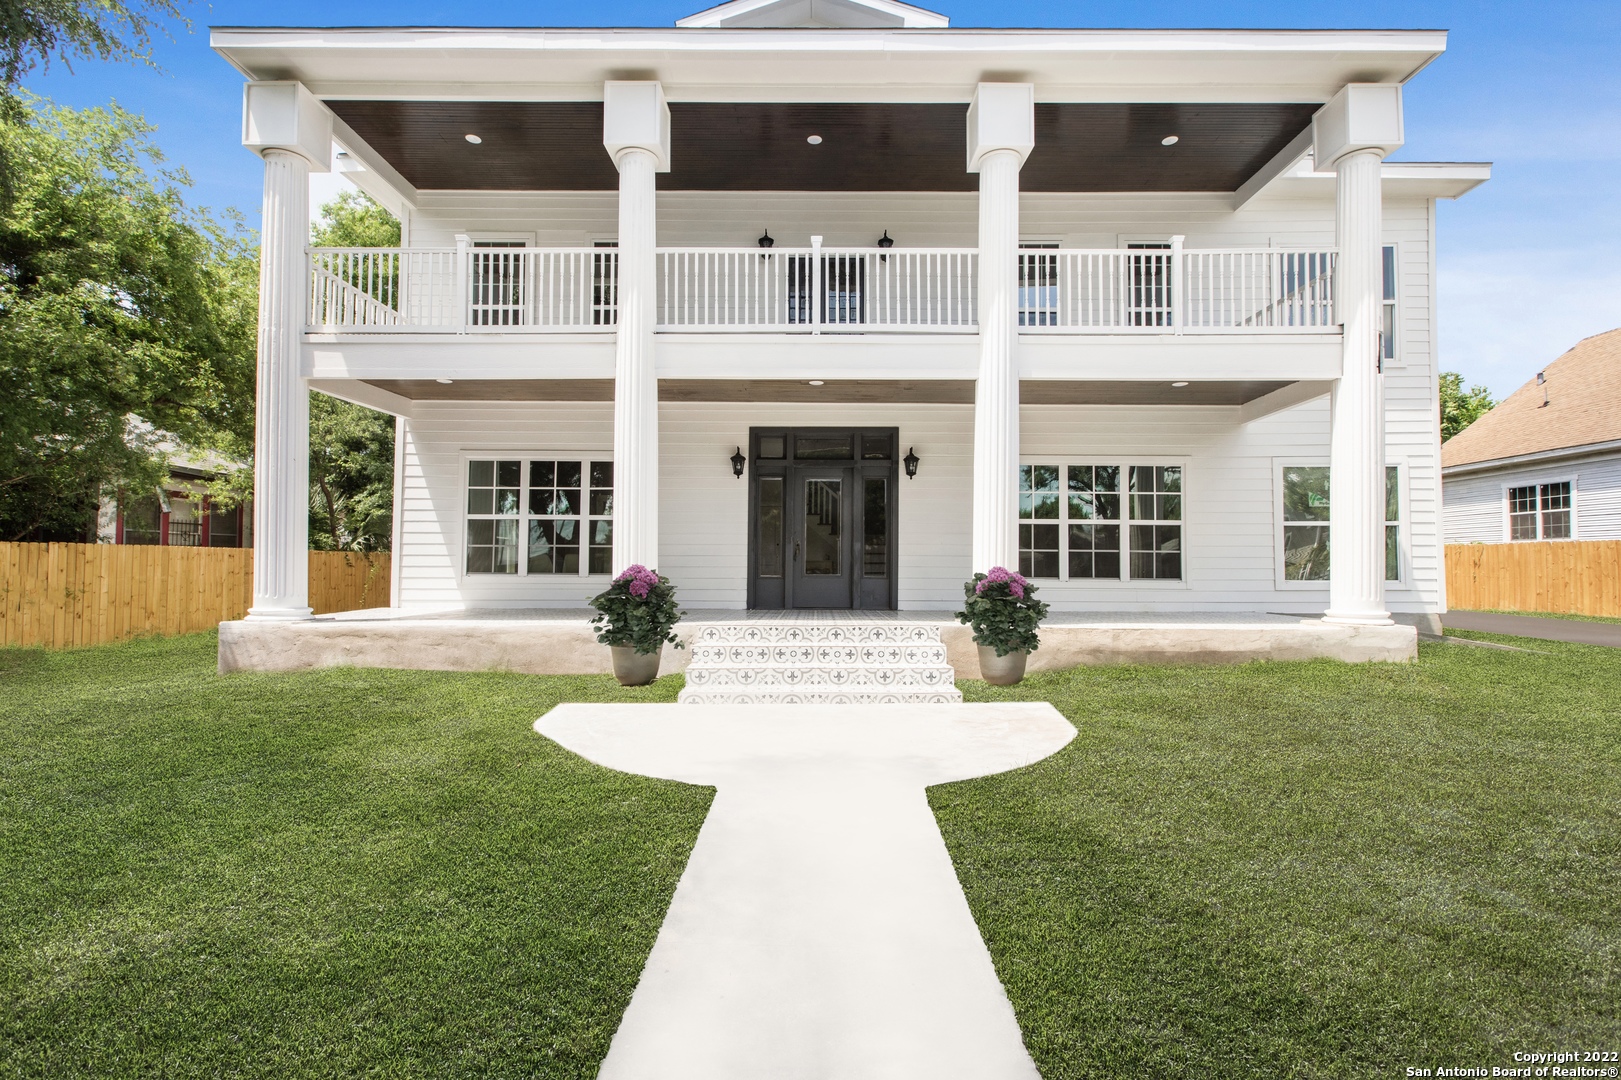 This grand and elegantly restored 1930s Colonial multi-family home sits on a double lot. It offers  5,926 square feet of rental income potential steps away from San Antonio's revered King  William and Southtown communities. The MF-33 zoned property includes 4 units just 5 minutes  from the center of downtown - perfect for young professionals, couples, small families, or vacation rentals. Two units are 3 beds/2 baths, and two units are 2 beds/2 baths. All 4 units are  completely renovated, blending historic charm with modern style. Upgraded features include restored hardwood floors, exposed shiplap, stainless steel appliances, double-paned windows, quartz countertops, and designer-grade tile. The residence's two-story covered front porch  flanked by grand columns provides a warm welcome home and the perfect spot to relax, overlooking the property's mature trees. This rare find is sure to be popular among future long-  term or short-term renters!